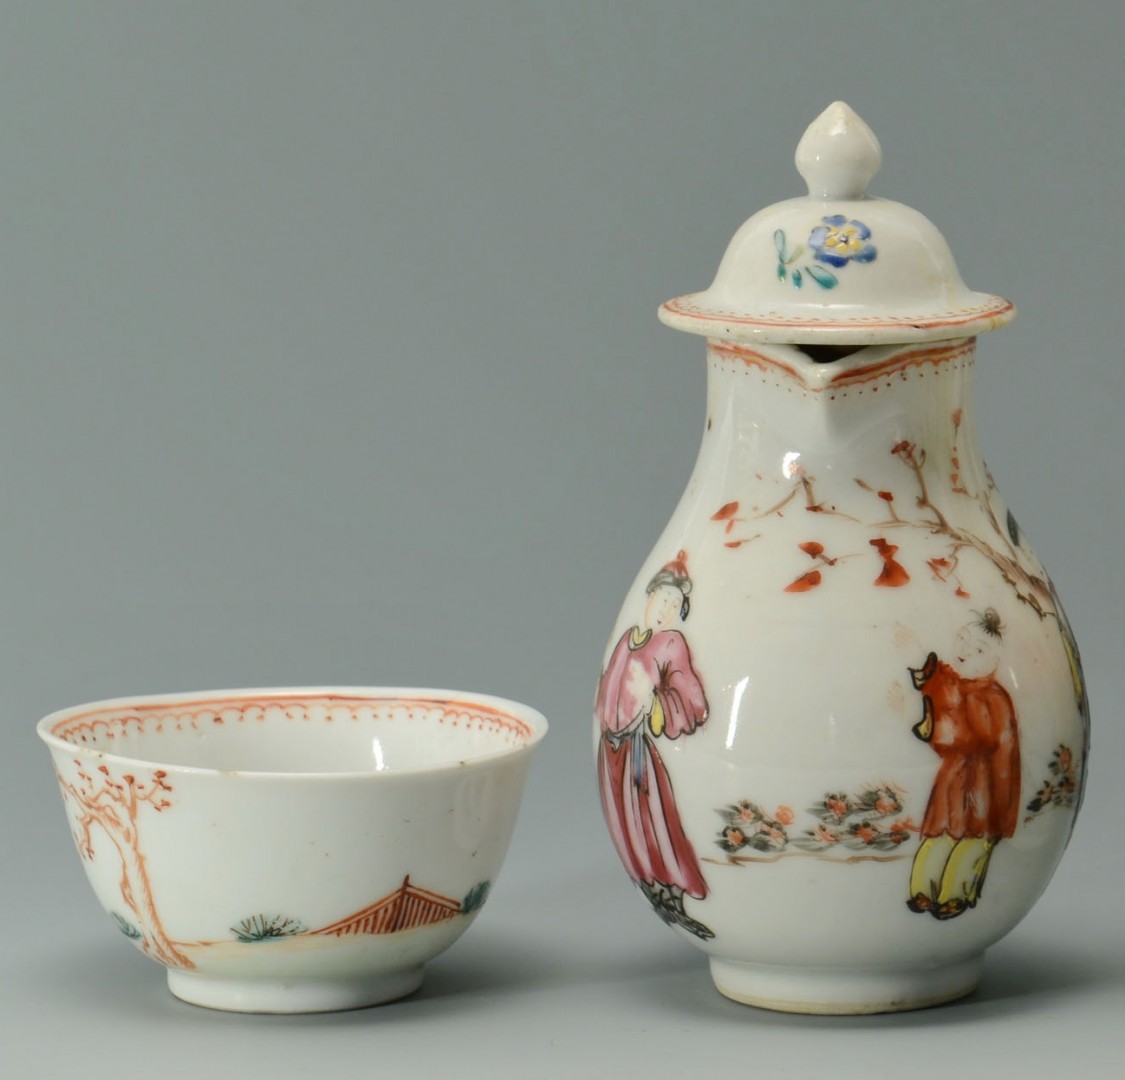 Lot 24: 4 Chinese Famille Rose Export Porcelain Items